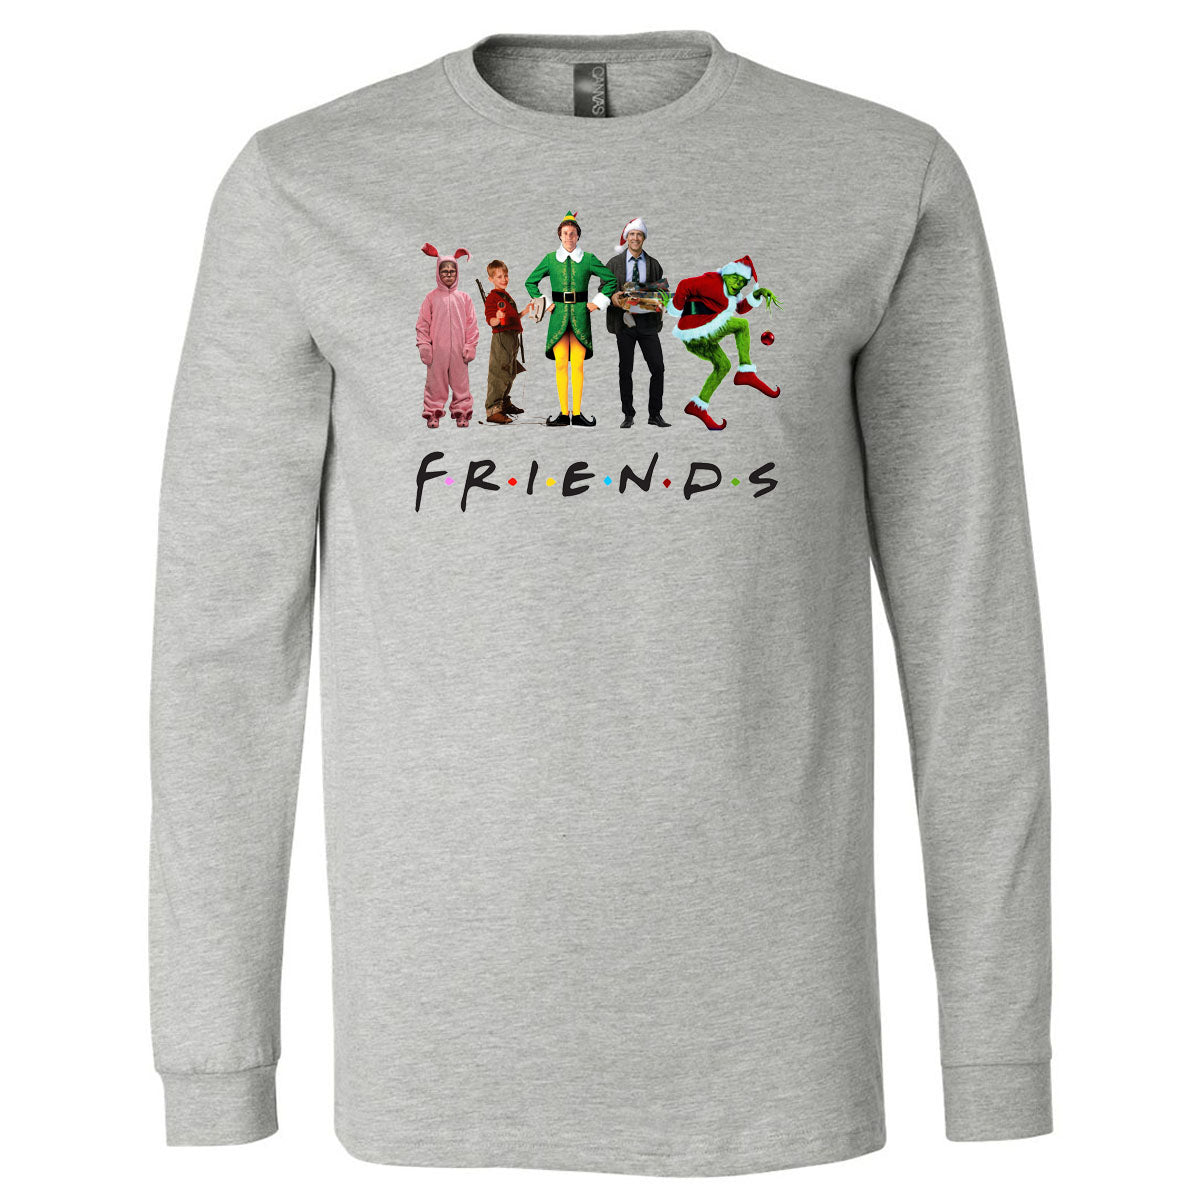 Friends Christmas Characters - Grey Longsleeves Tee - Southern Grace Creations